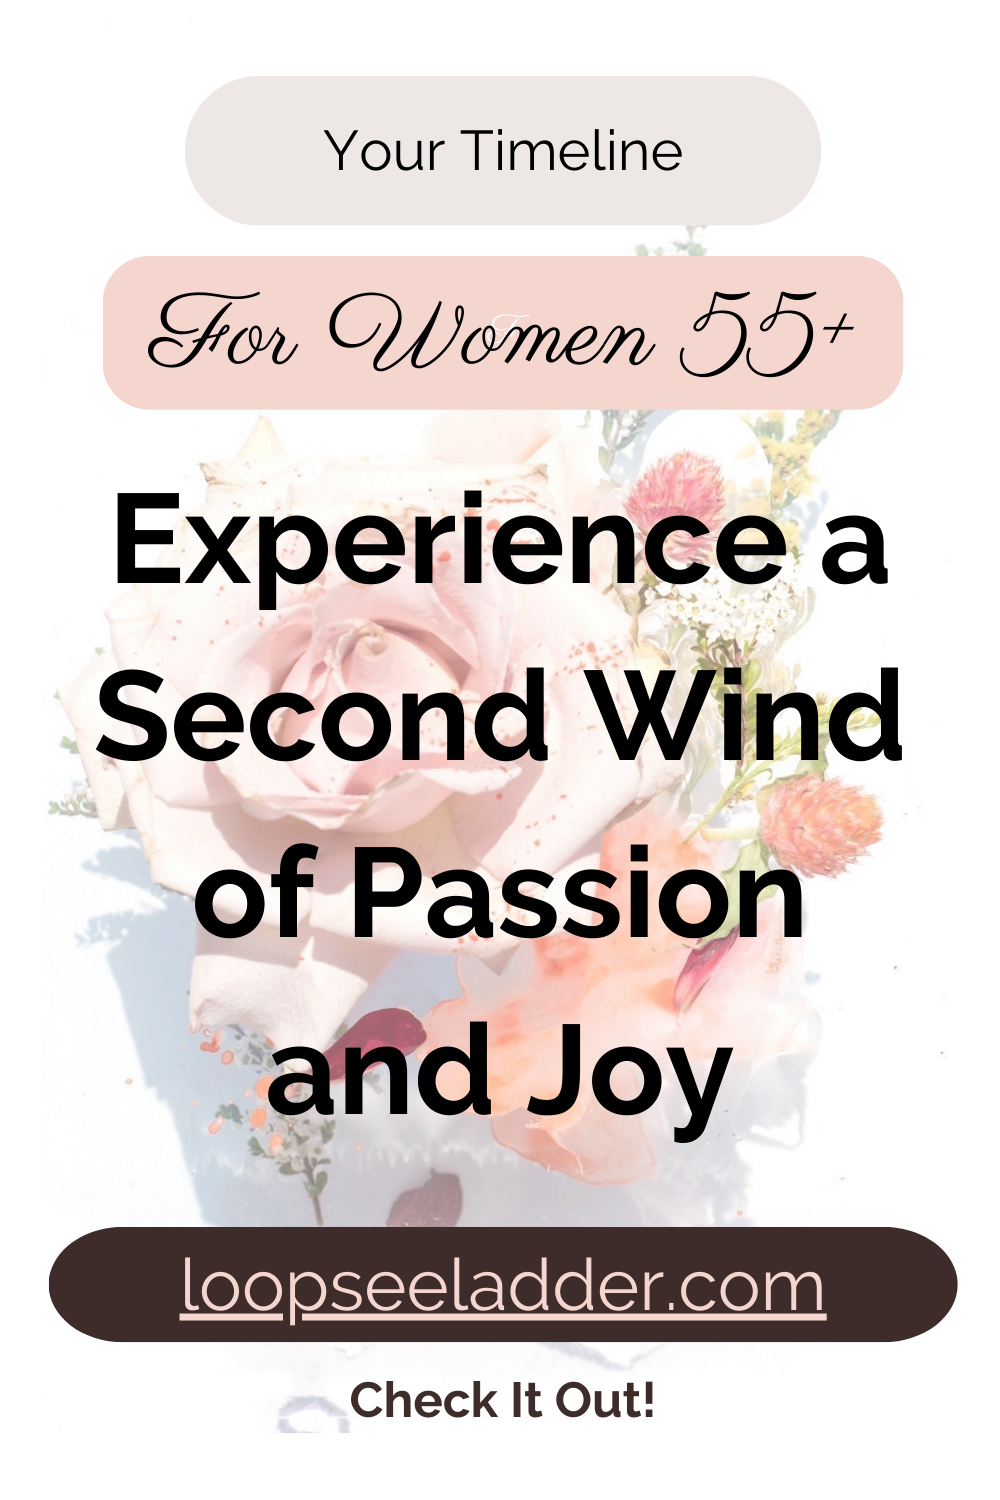 Why Women 55+ Are Discovering a Second Wind of Passion and Joy